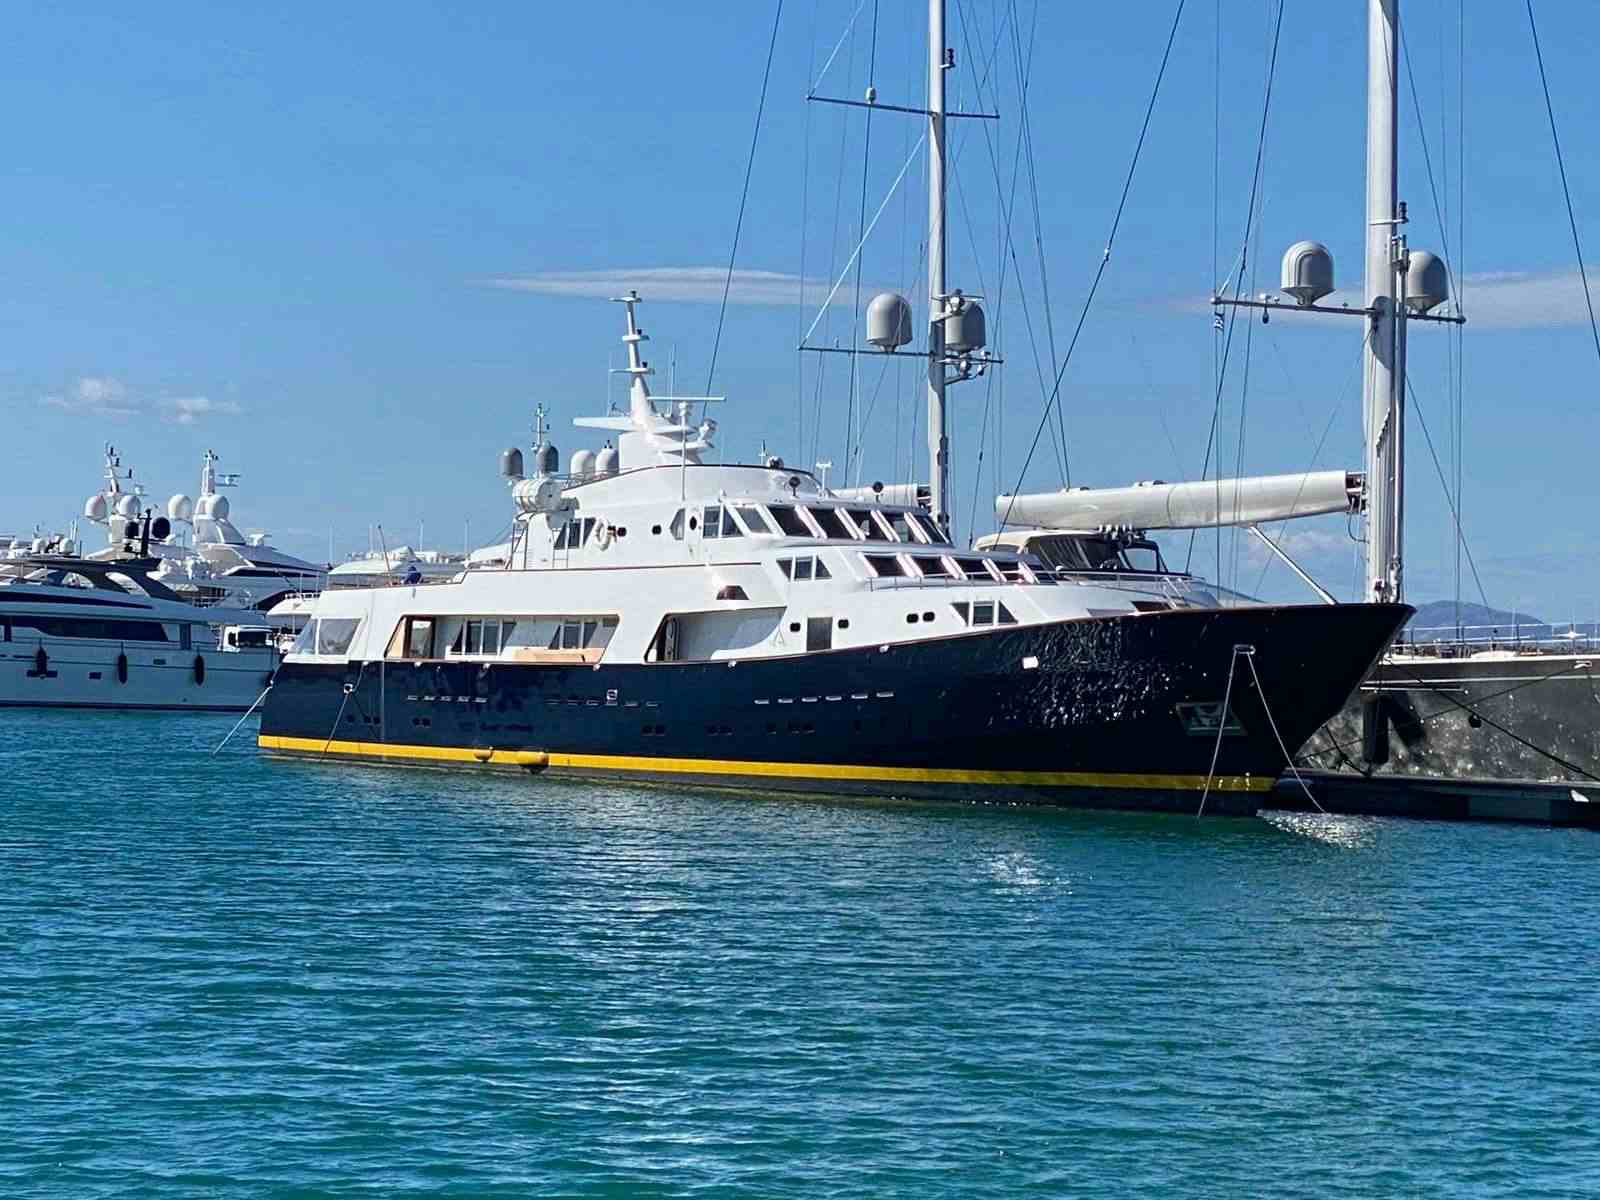 SOMETHING COOL - Yacht Charter Porto Pozzo & Boat hire in Summer: W. Med -Naples/Sicily, Greece, W. Med -Riviera/Cors/Sard., Turkey, W. Med - Spain/Balearics, Croatia | Winter: Indian Ocean and SE Asia, Red Sea, United Arab Emirates 1